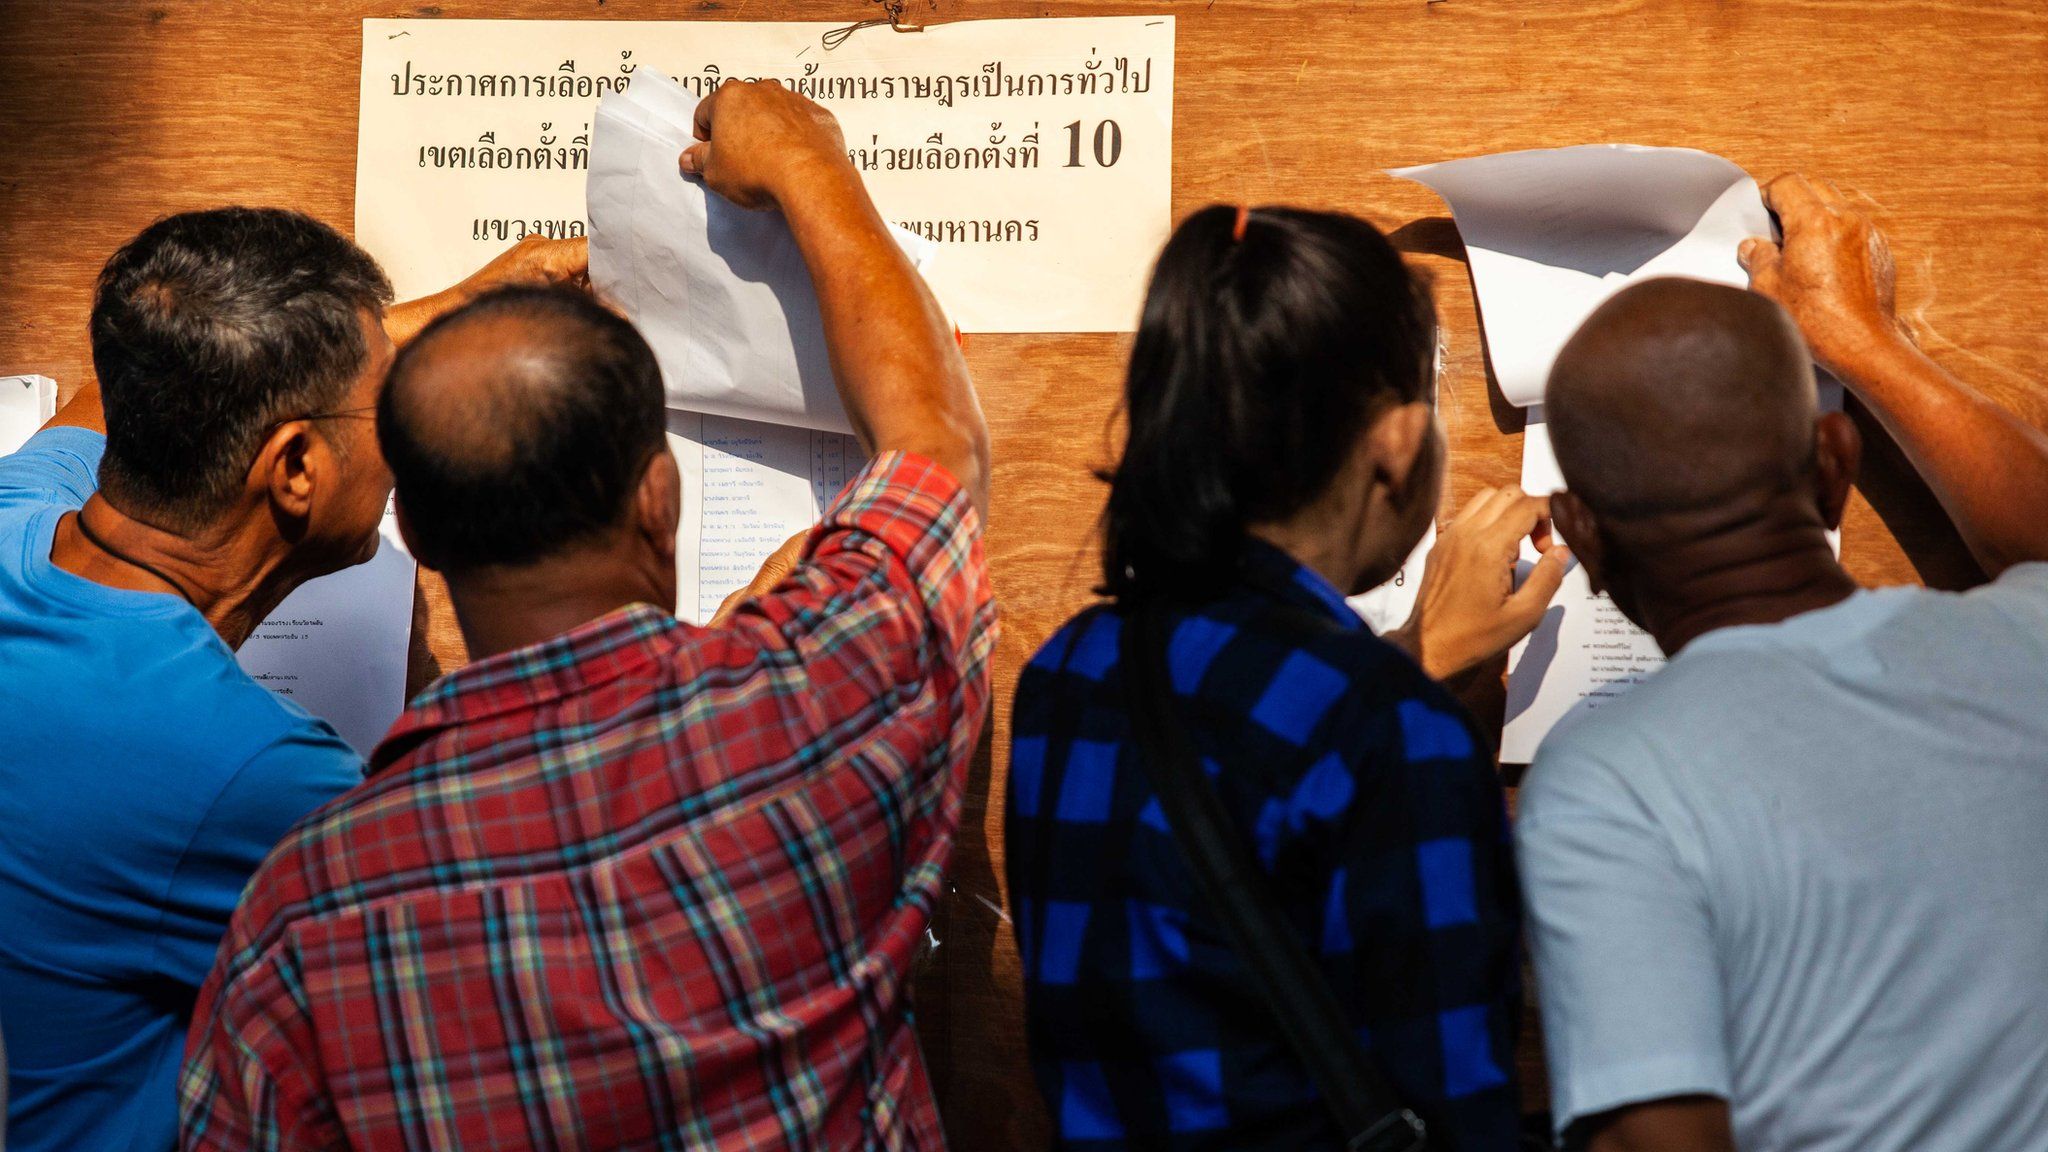 Voters go to the polls on March 24, 2019 in Bangkok, Thailand